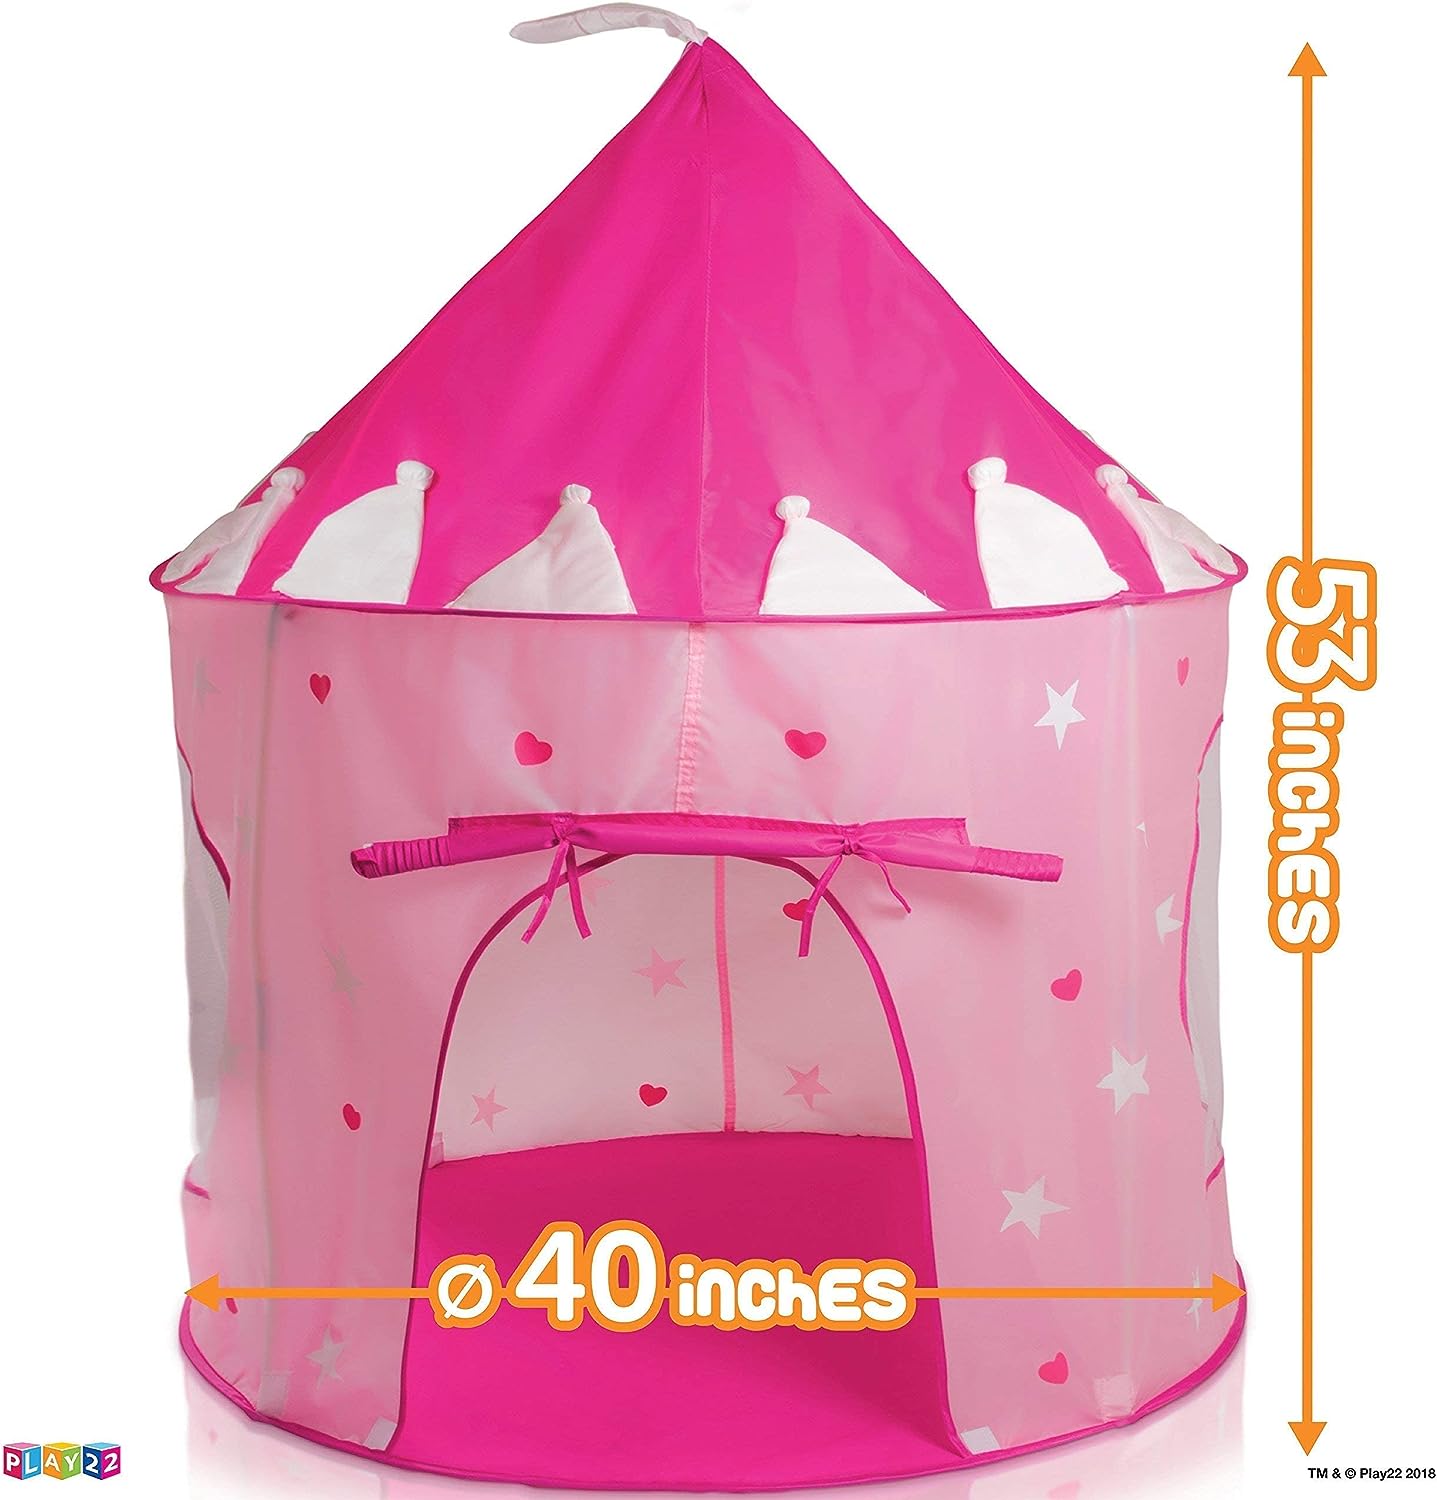 Play Tent Princess Castle Pink - Features Glow in The Dark Stars - Portable - Kids Pop Up Tent Foldable Into A Carrying Bag - Indoor and Outdoor Use - Original